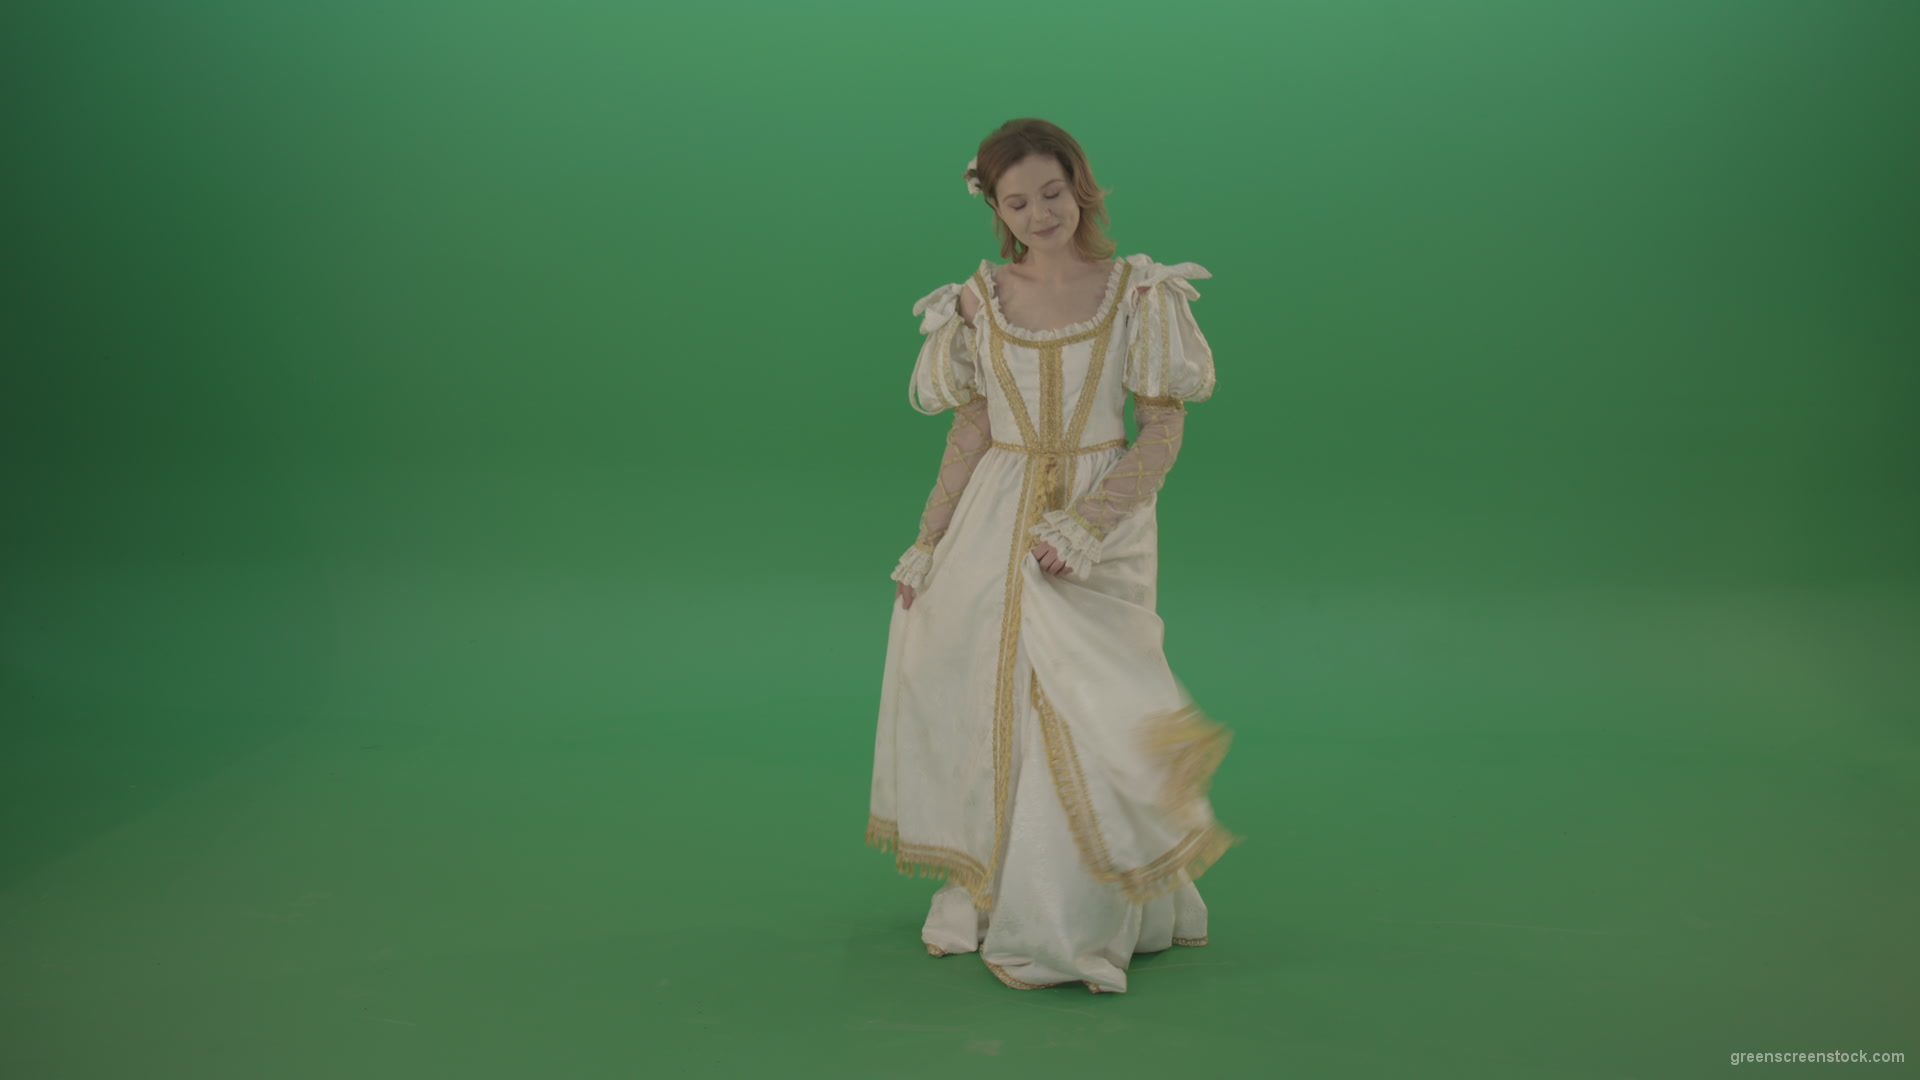 Easy-bowed-girl-is-happy-to-meet-isolated-on-green-screen_006 Green Screen Stock